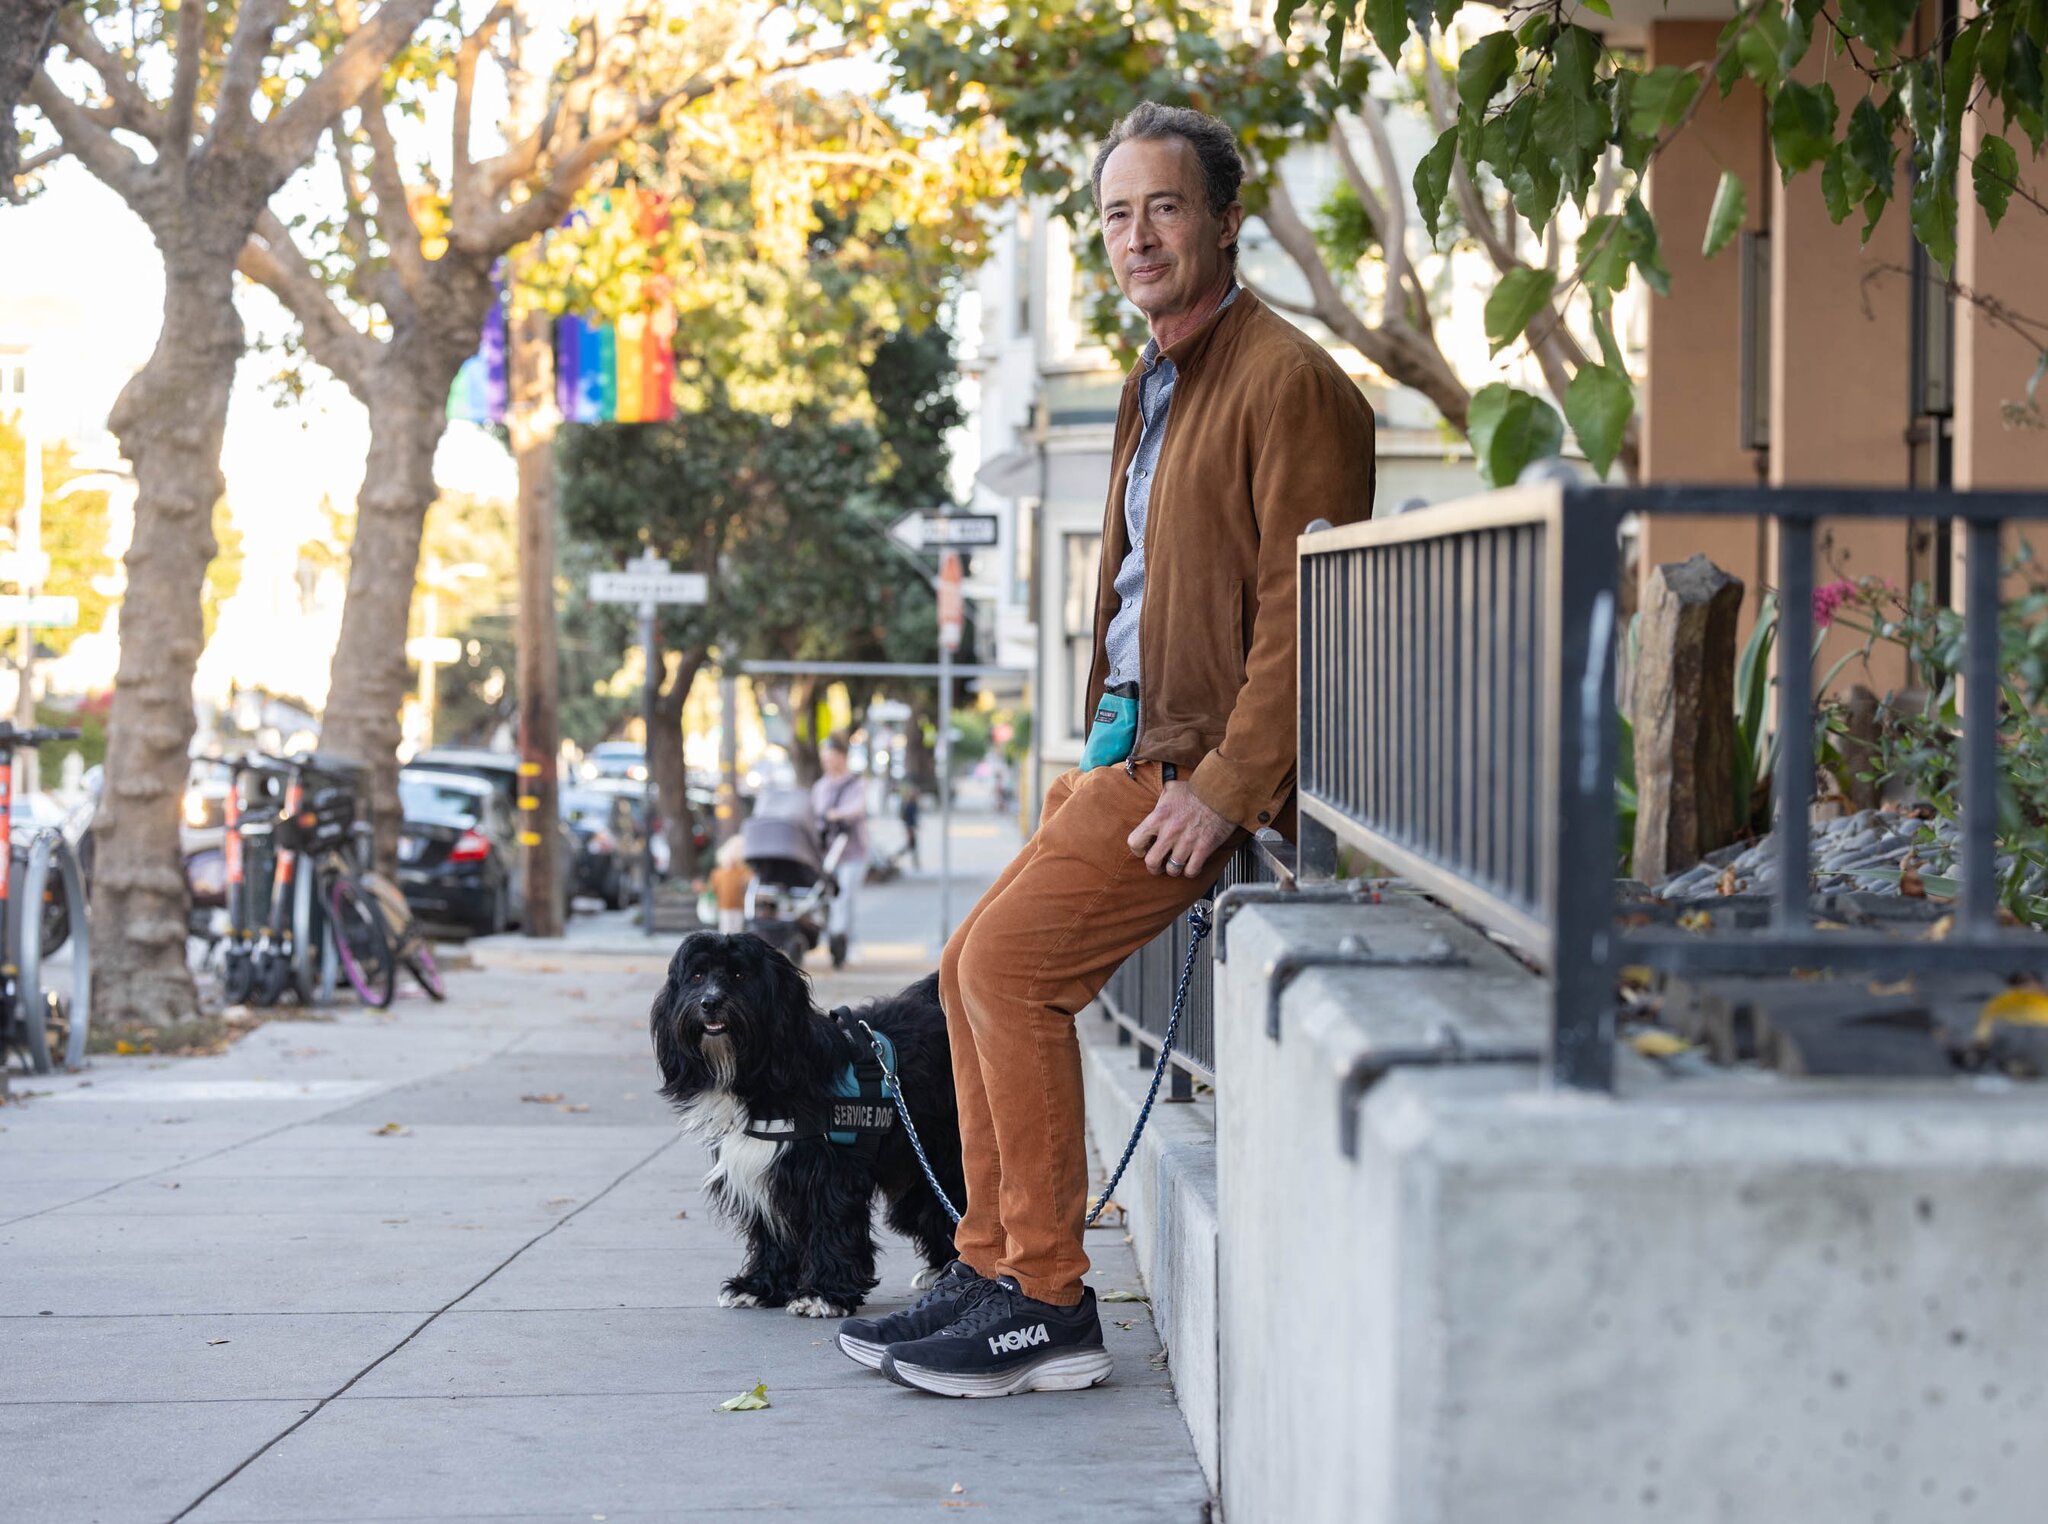 A small black dog lies on a sidewalk at the foot of its owner, who is wearing black sneakers and orange pants and shirt.